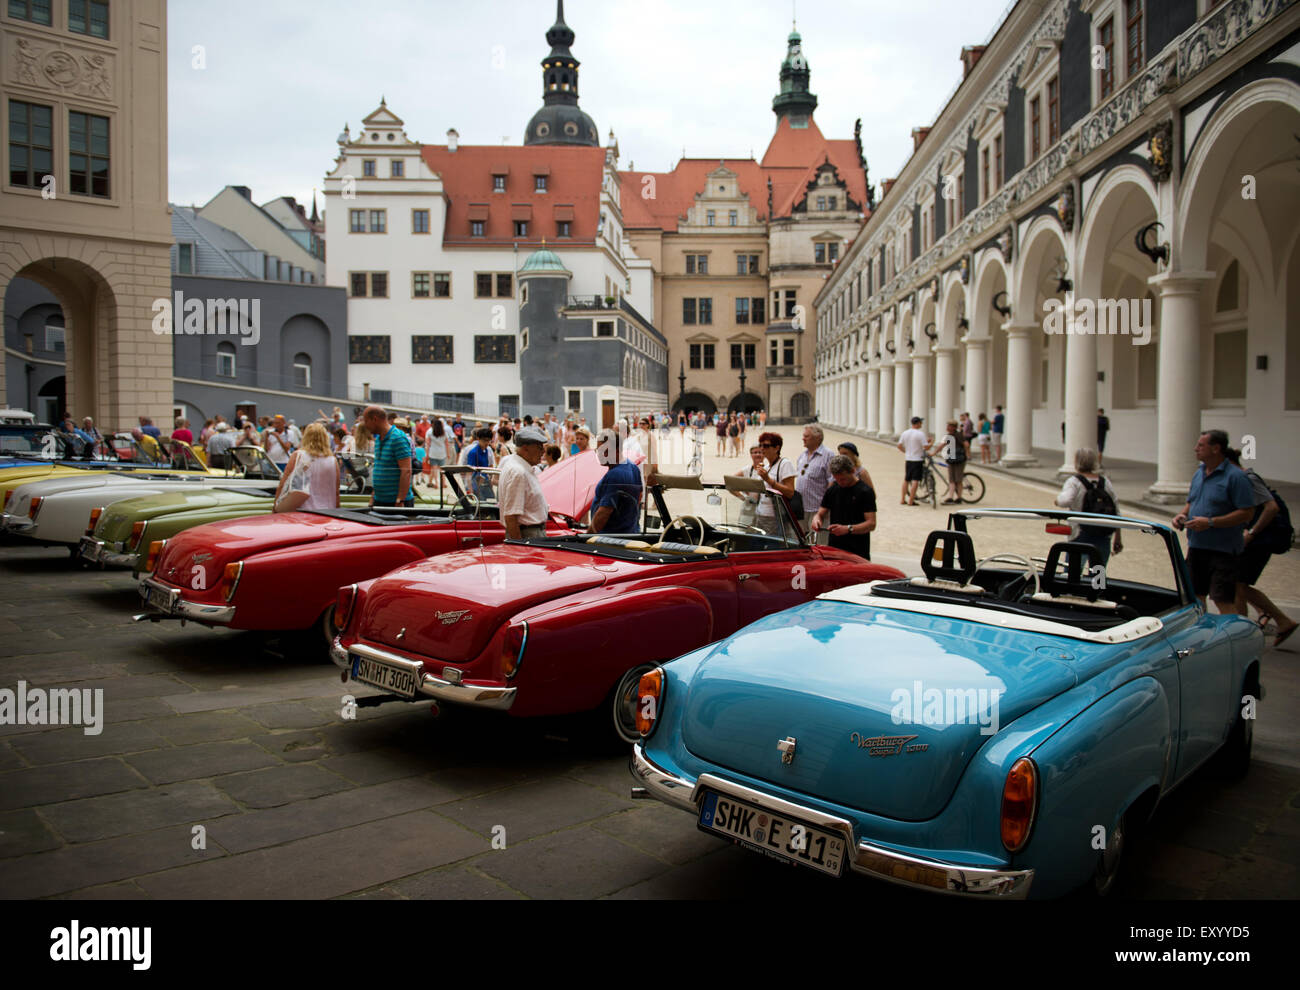 Dresden, Germany. 18th July, 2015. Several of around 70 'Wartburg 311/312 300 HT' convertibles manufactured in the former German Democratic Republic (GDR) are on display in Dresden, Germany, 18 July 2015. The Wartburg 311/312 300 HT was introduced during the Leipzig spring trade show in March 1965. It was the last convertible to be manufactured in the GDR. Photo: Arno Burgi/dpa/Alamy Live News Stock Photo